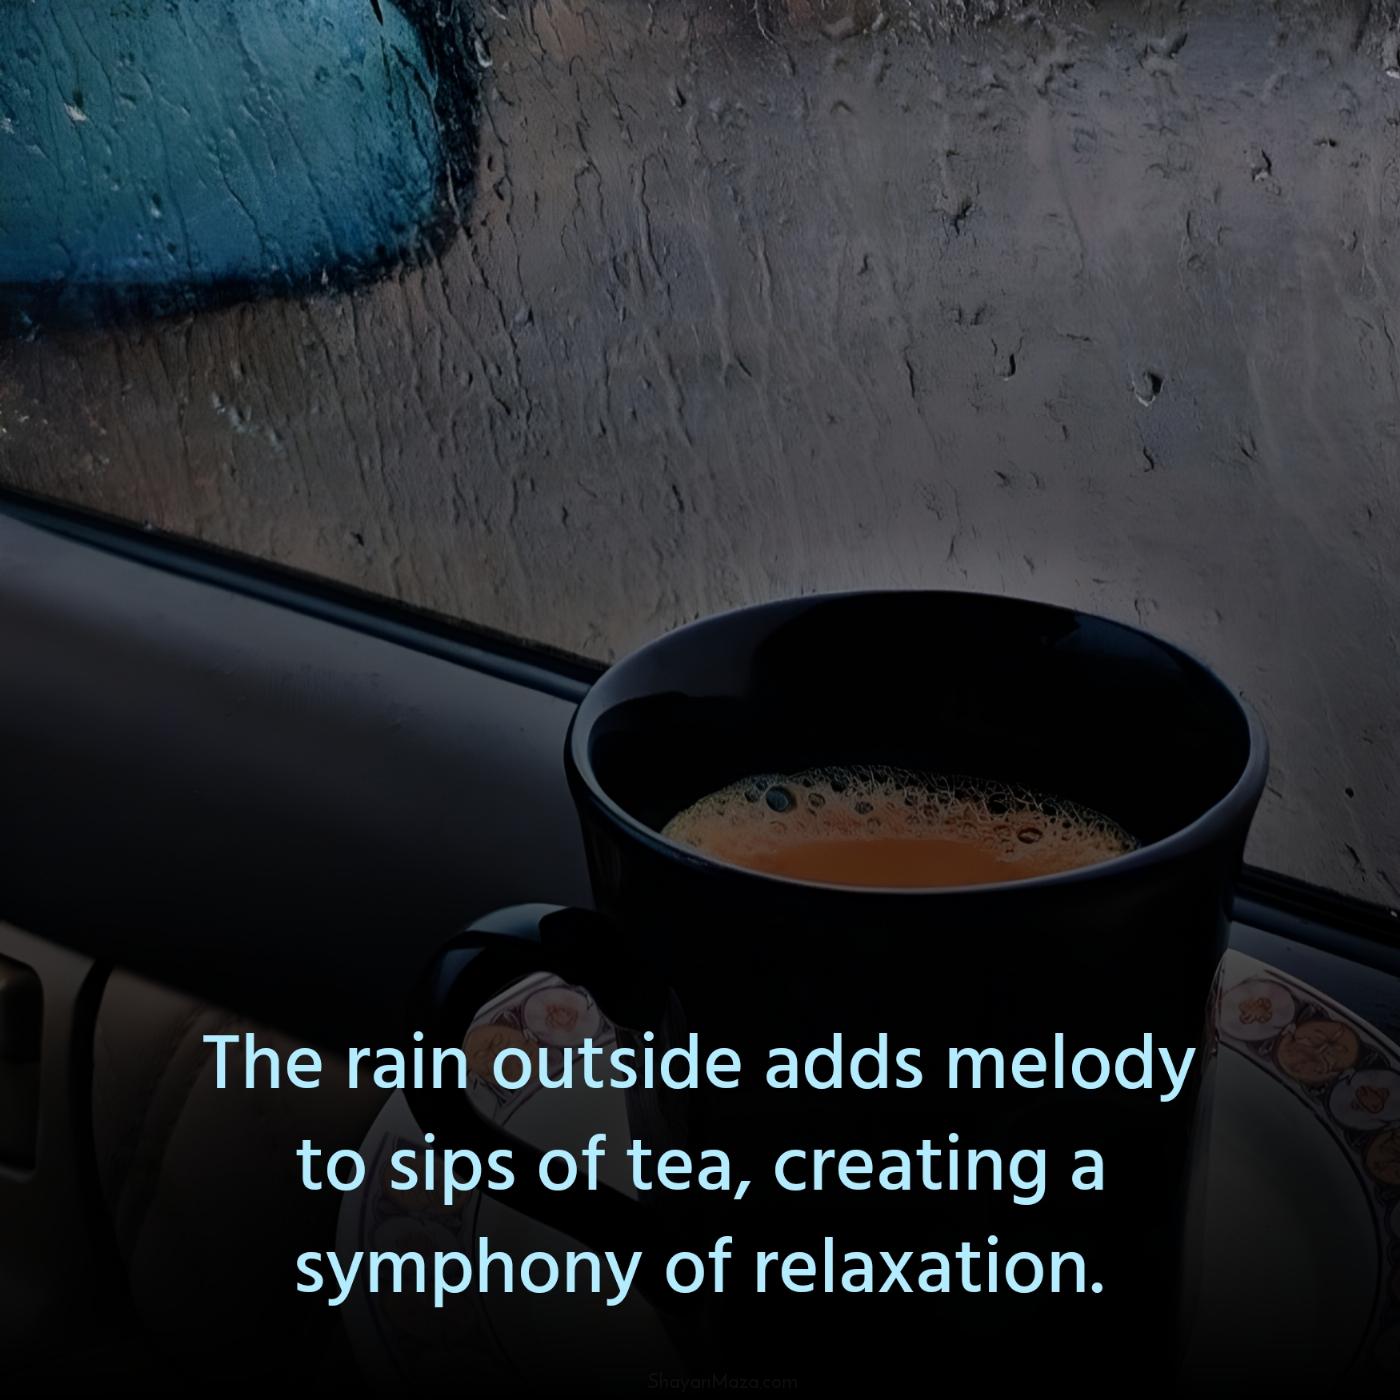 The rain outside adds melody to sips of tea